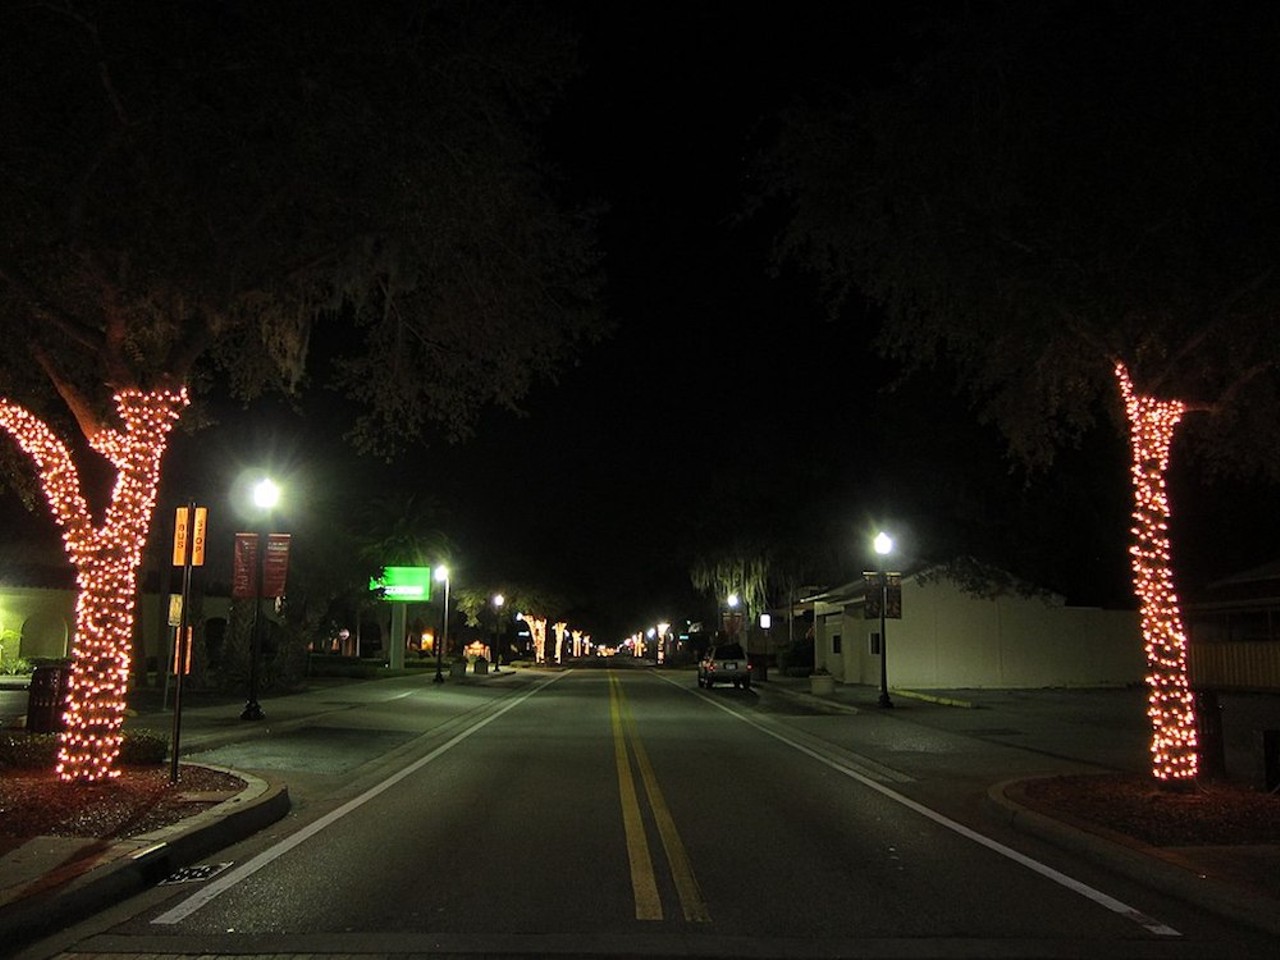 Safety Harbor Ghost Walking Tours
Saturday, Oct. 13
Photo via Roman Eugeniusz [CC BY-SA 3.0  (https://creativecommons.org/licenses/by-sa/3.0)], via Wikimedia Commons